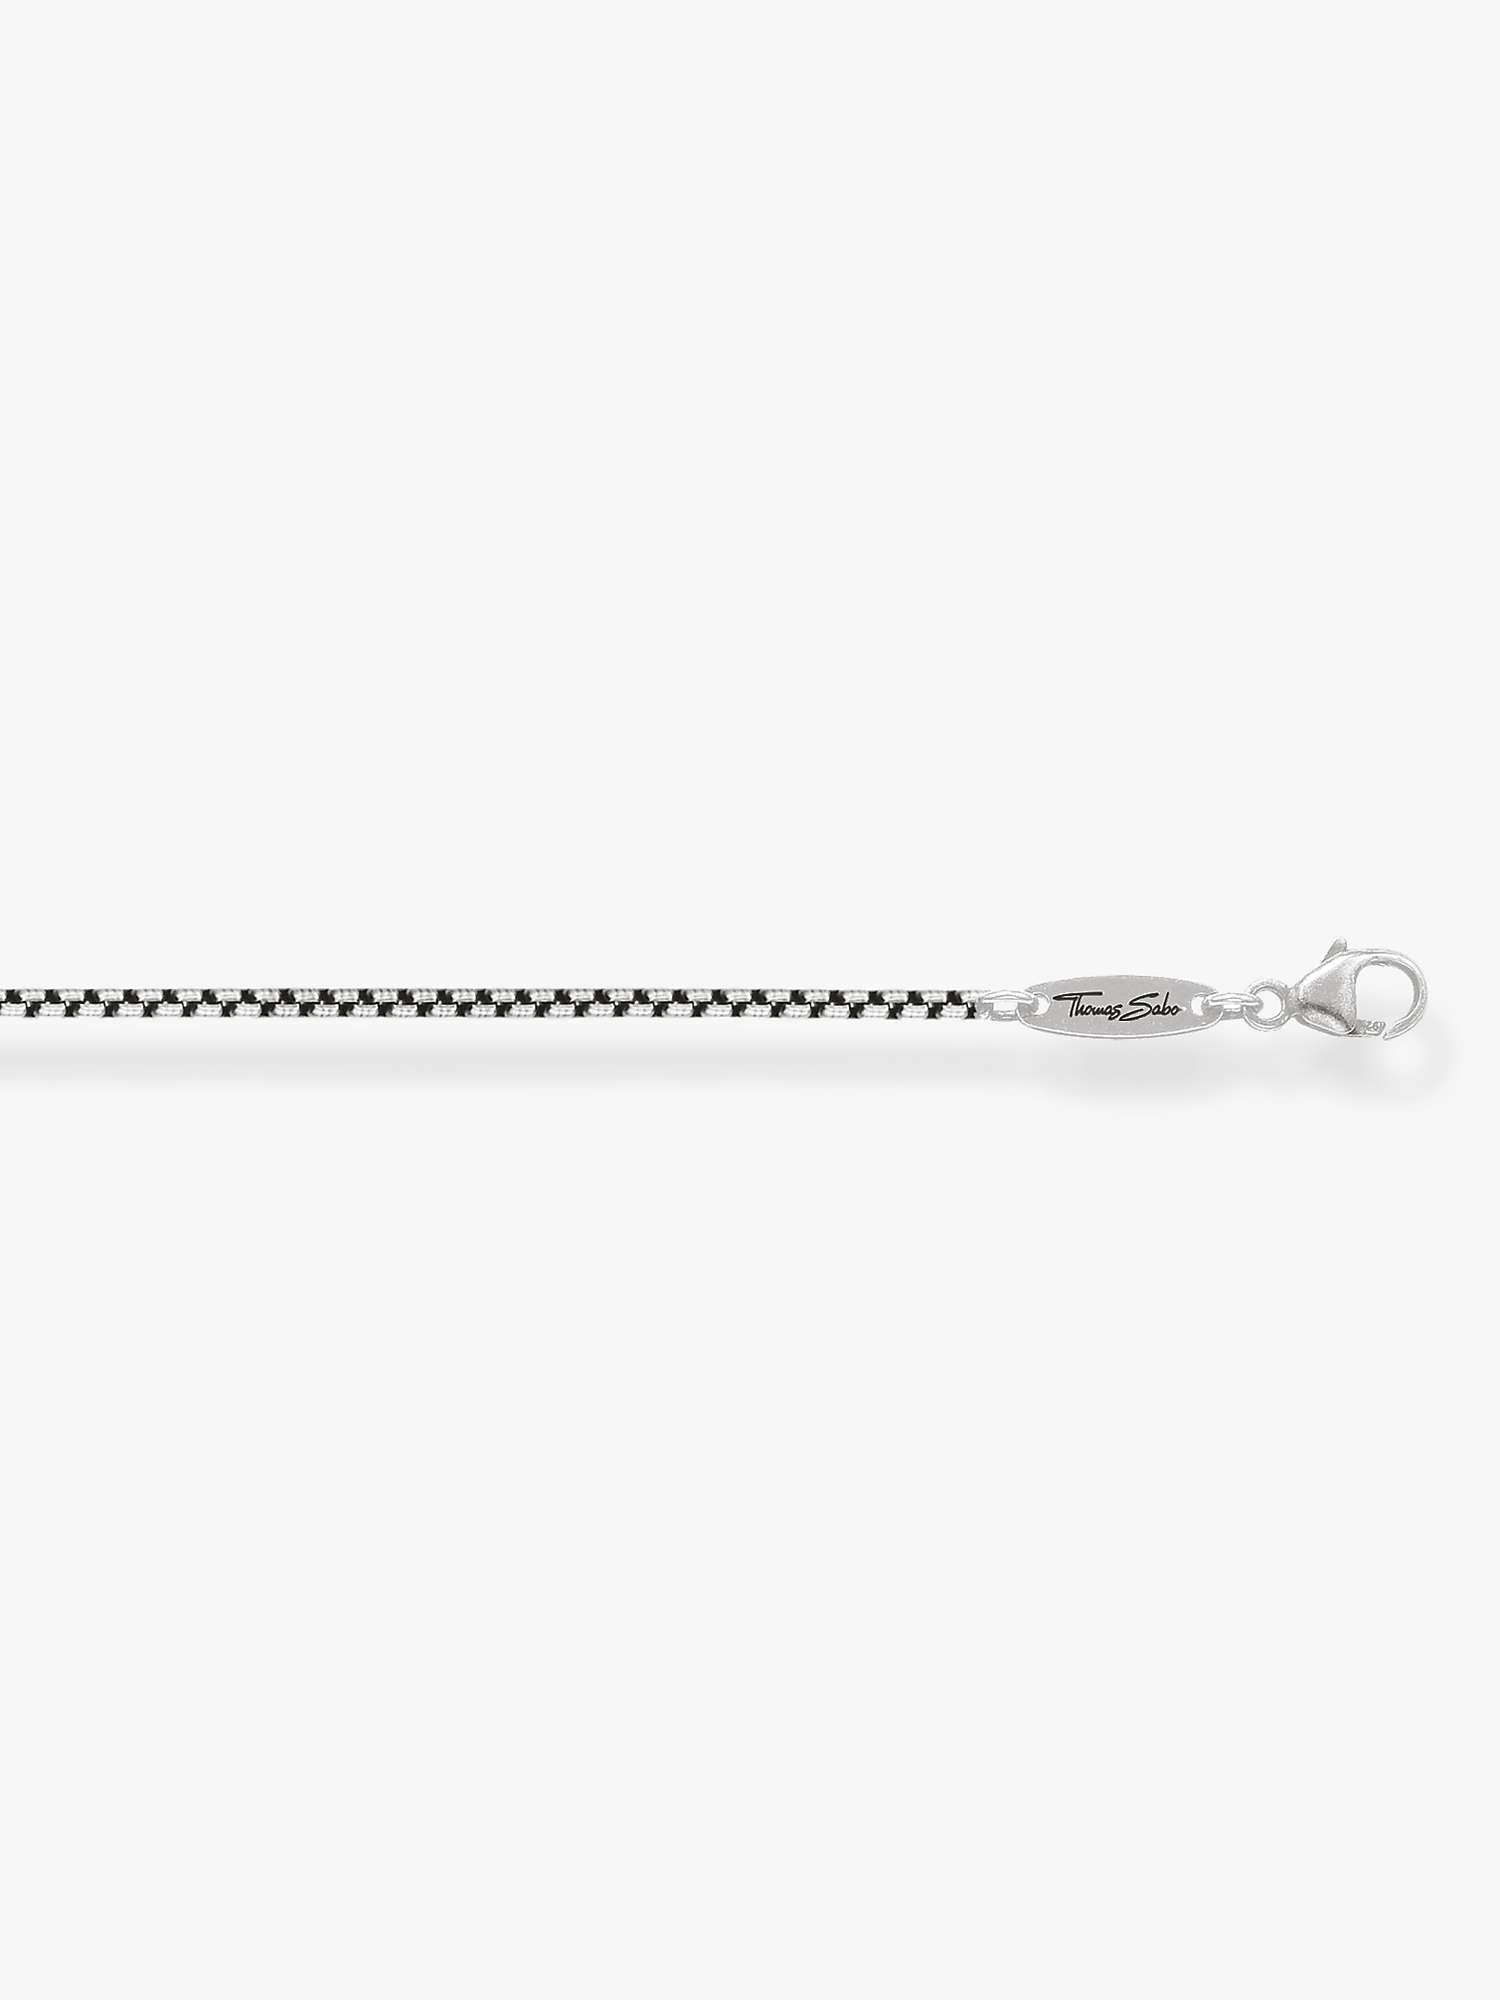 Buy THOMAS SABO Men's Chain Necklace, Silver Online at johnlewis.com